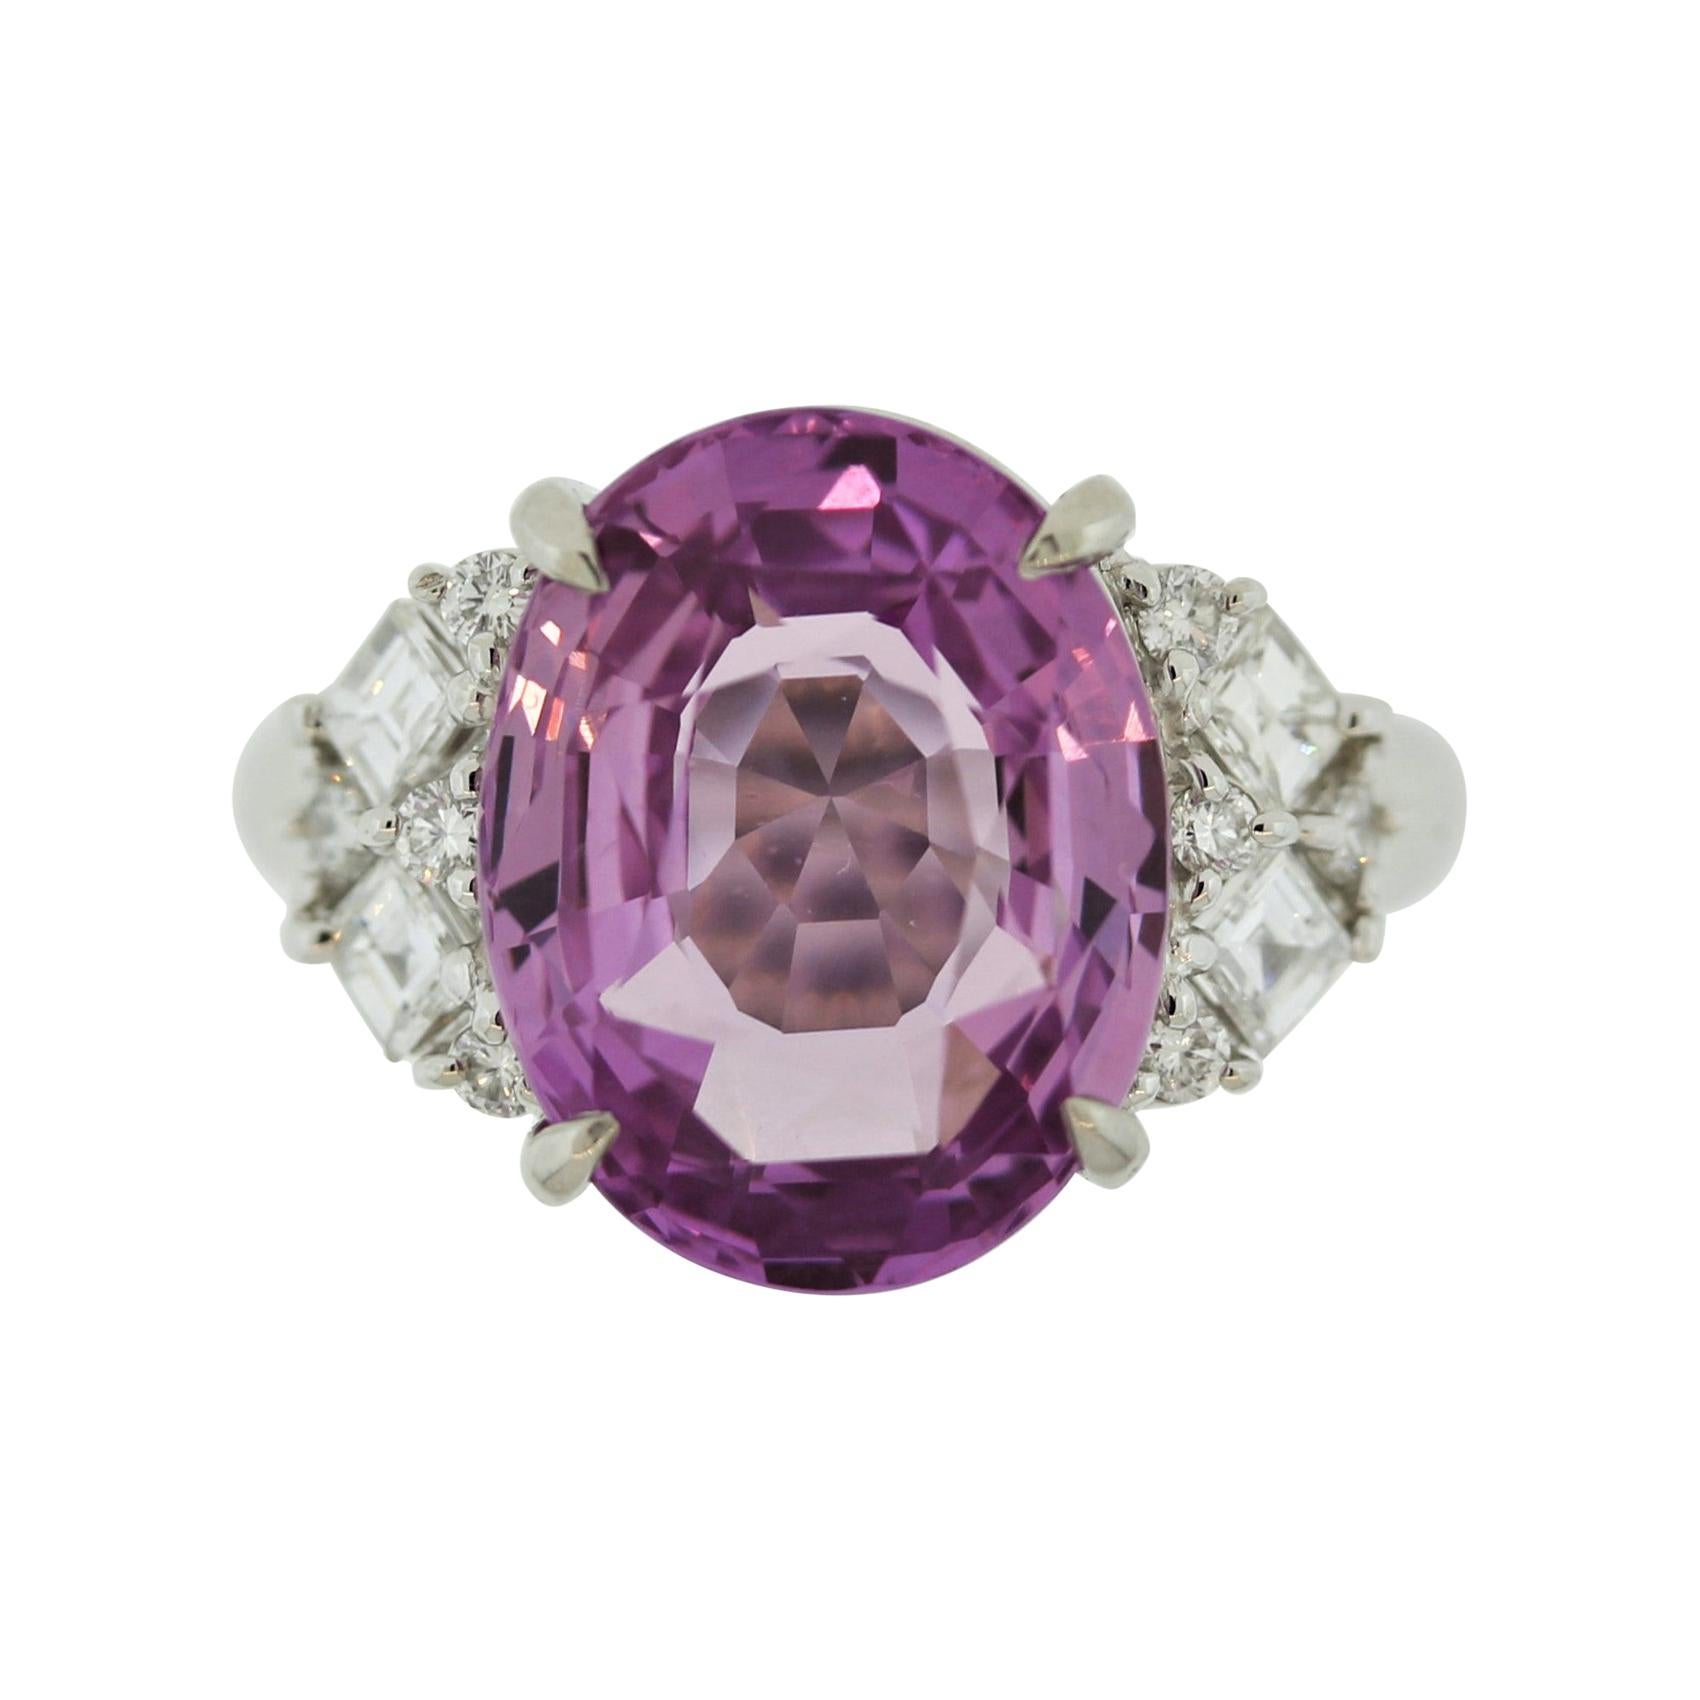 8.04 Carat Pink Sapphire Diamond Platinum Ring, GIA Certified For Sale